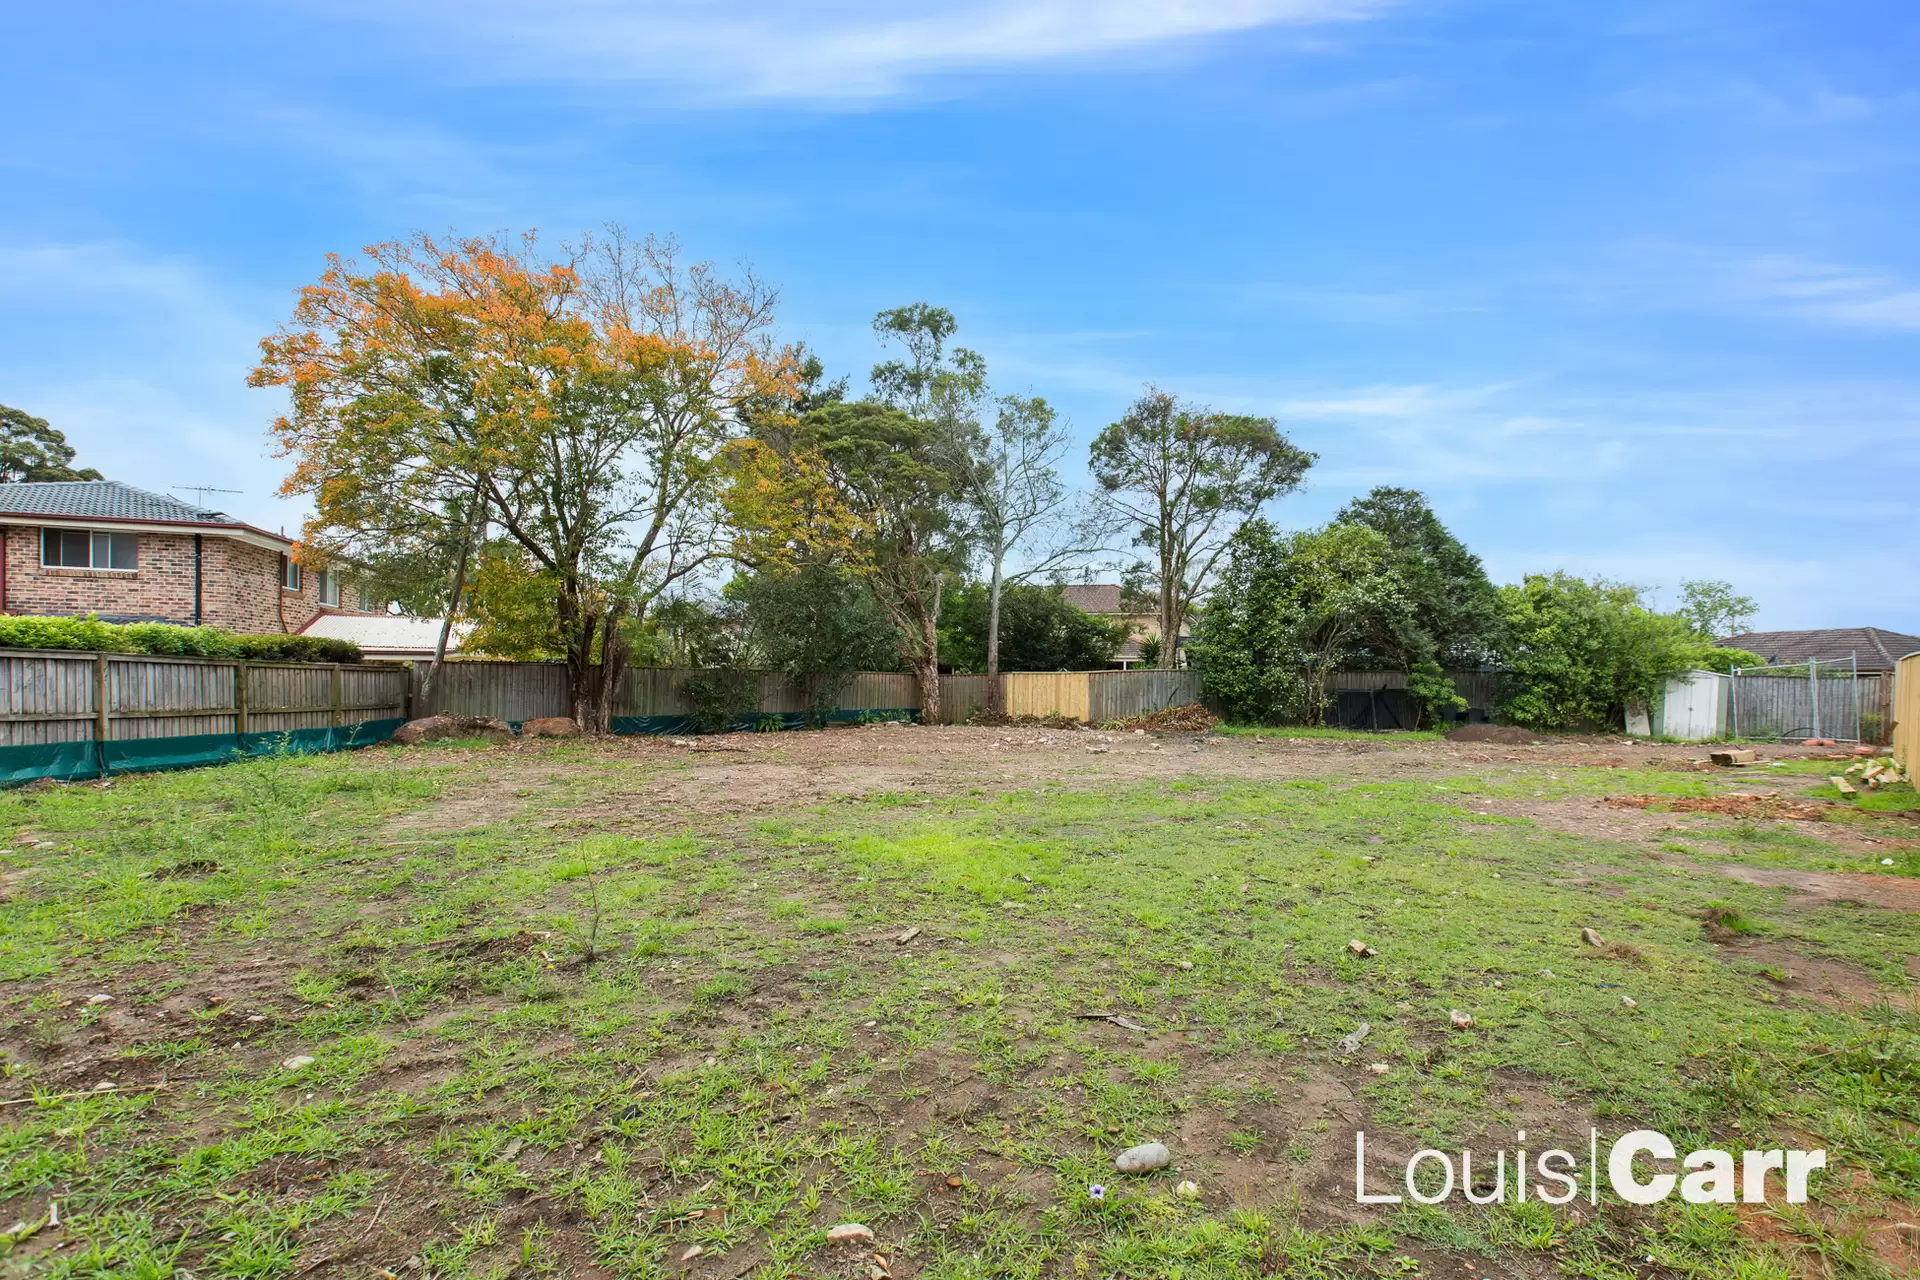 Photo #3: 2A Gumnut Road, Cherrybrook - For Sale by Louis Carr Real Estate